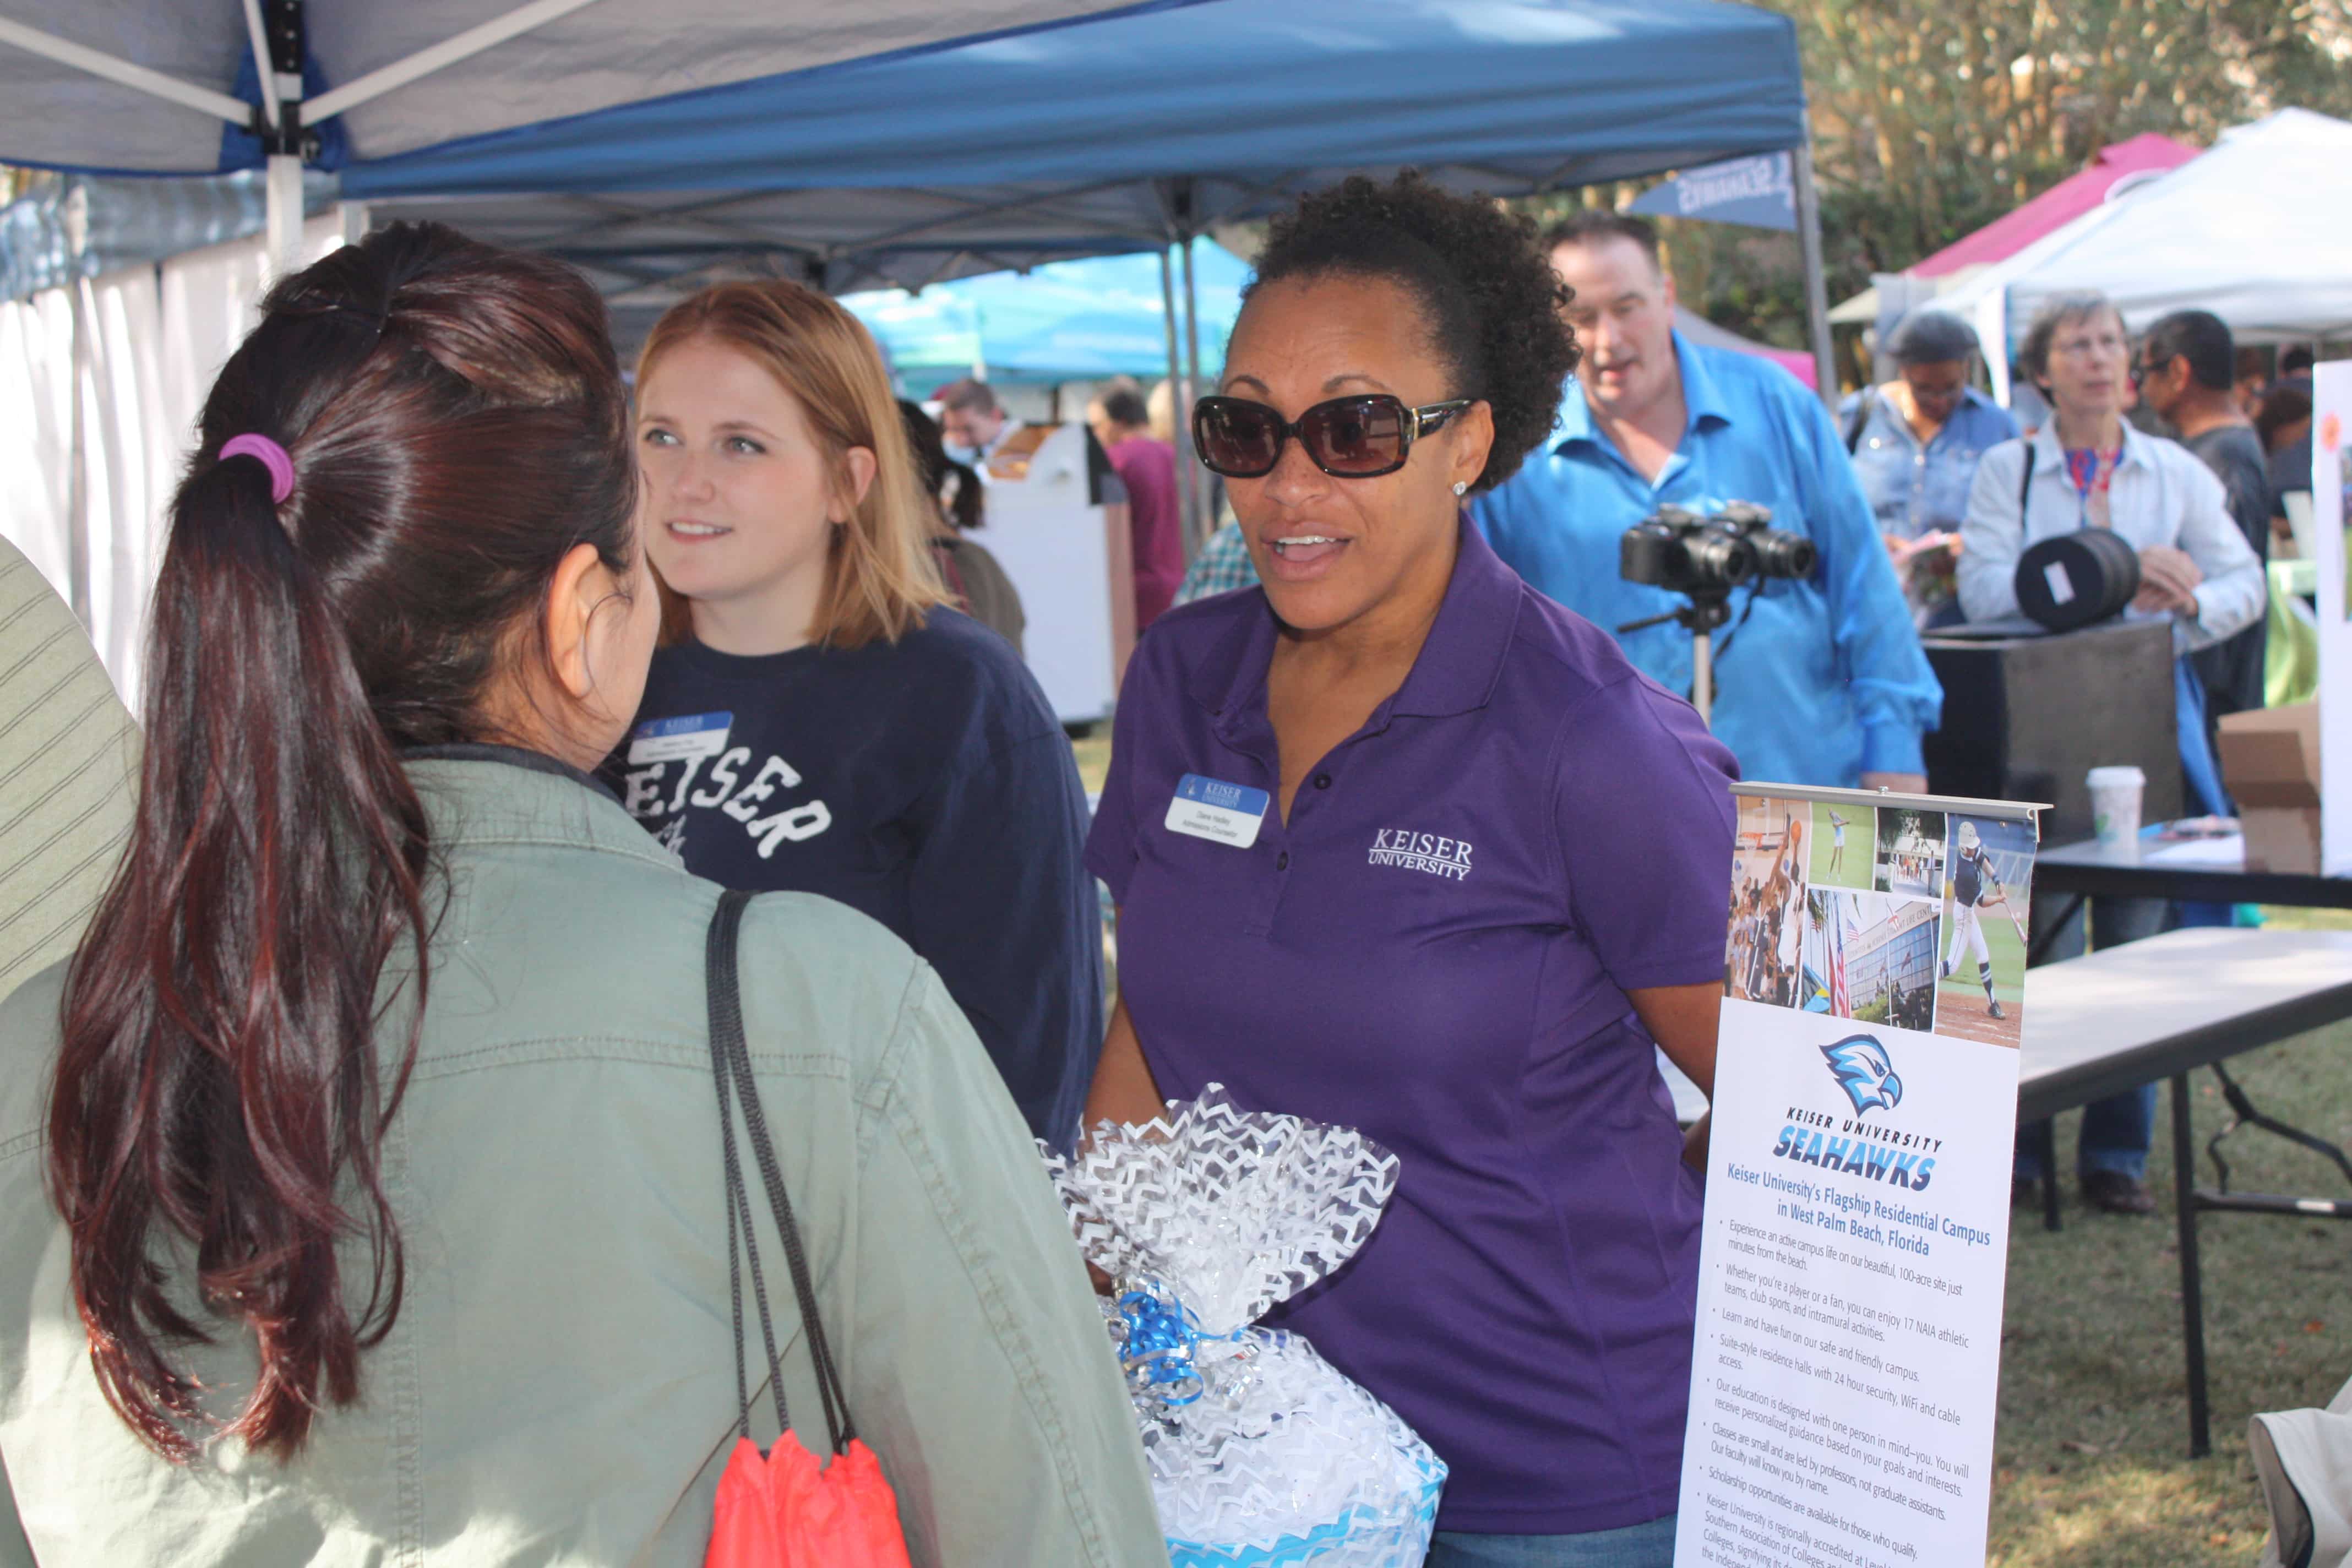 Tallahassee Campus in 6th Annual Science Festival